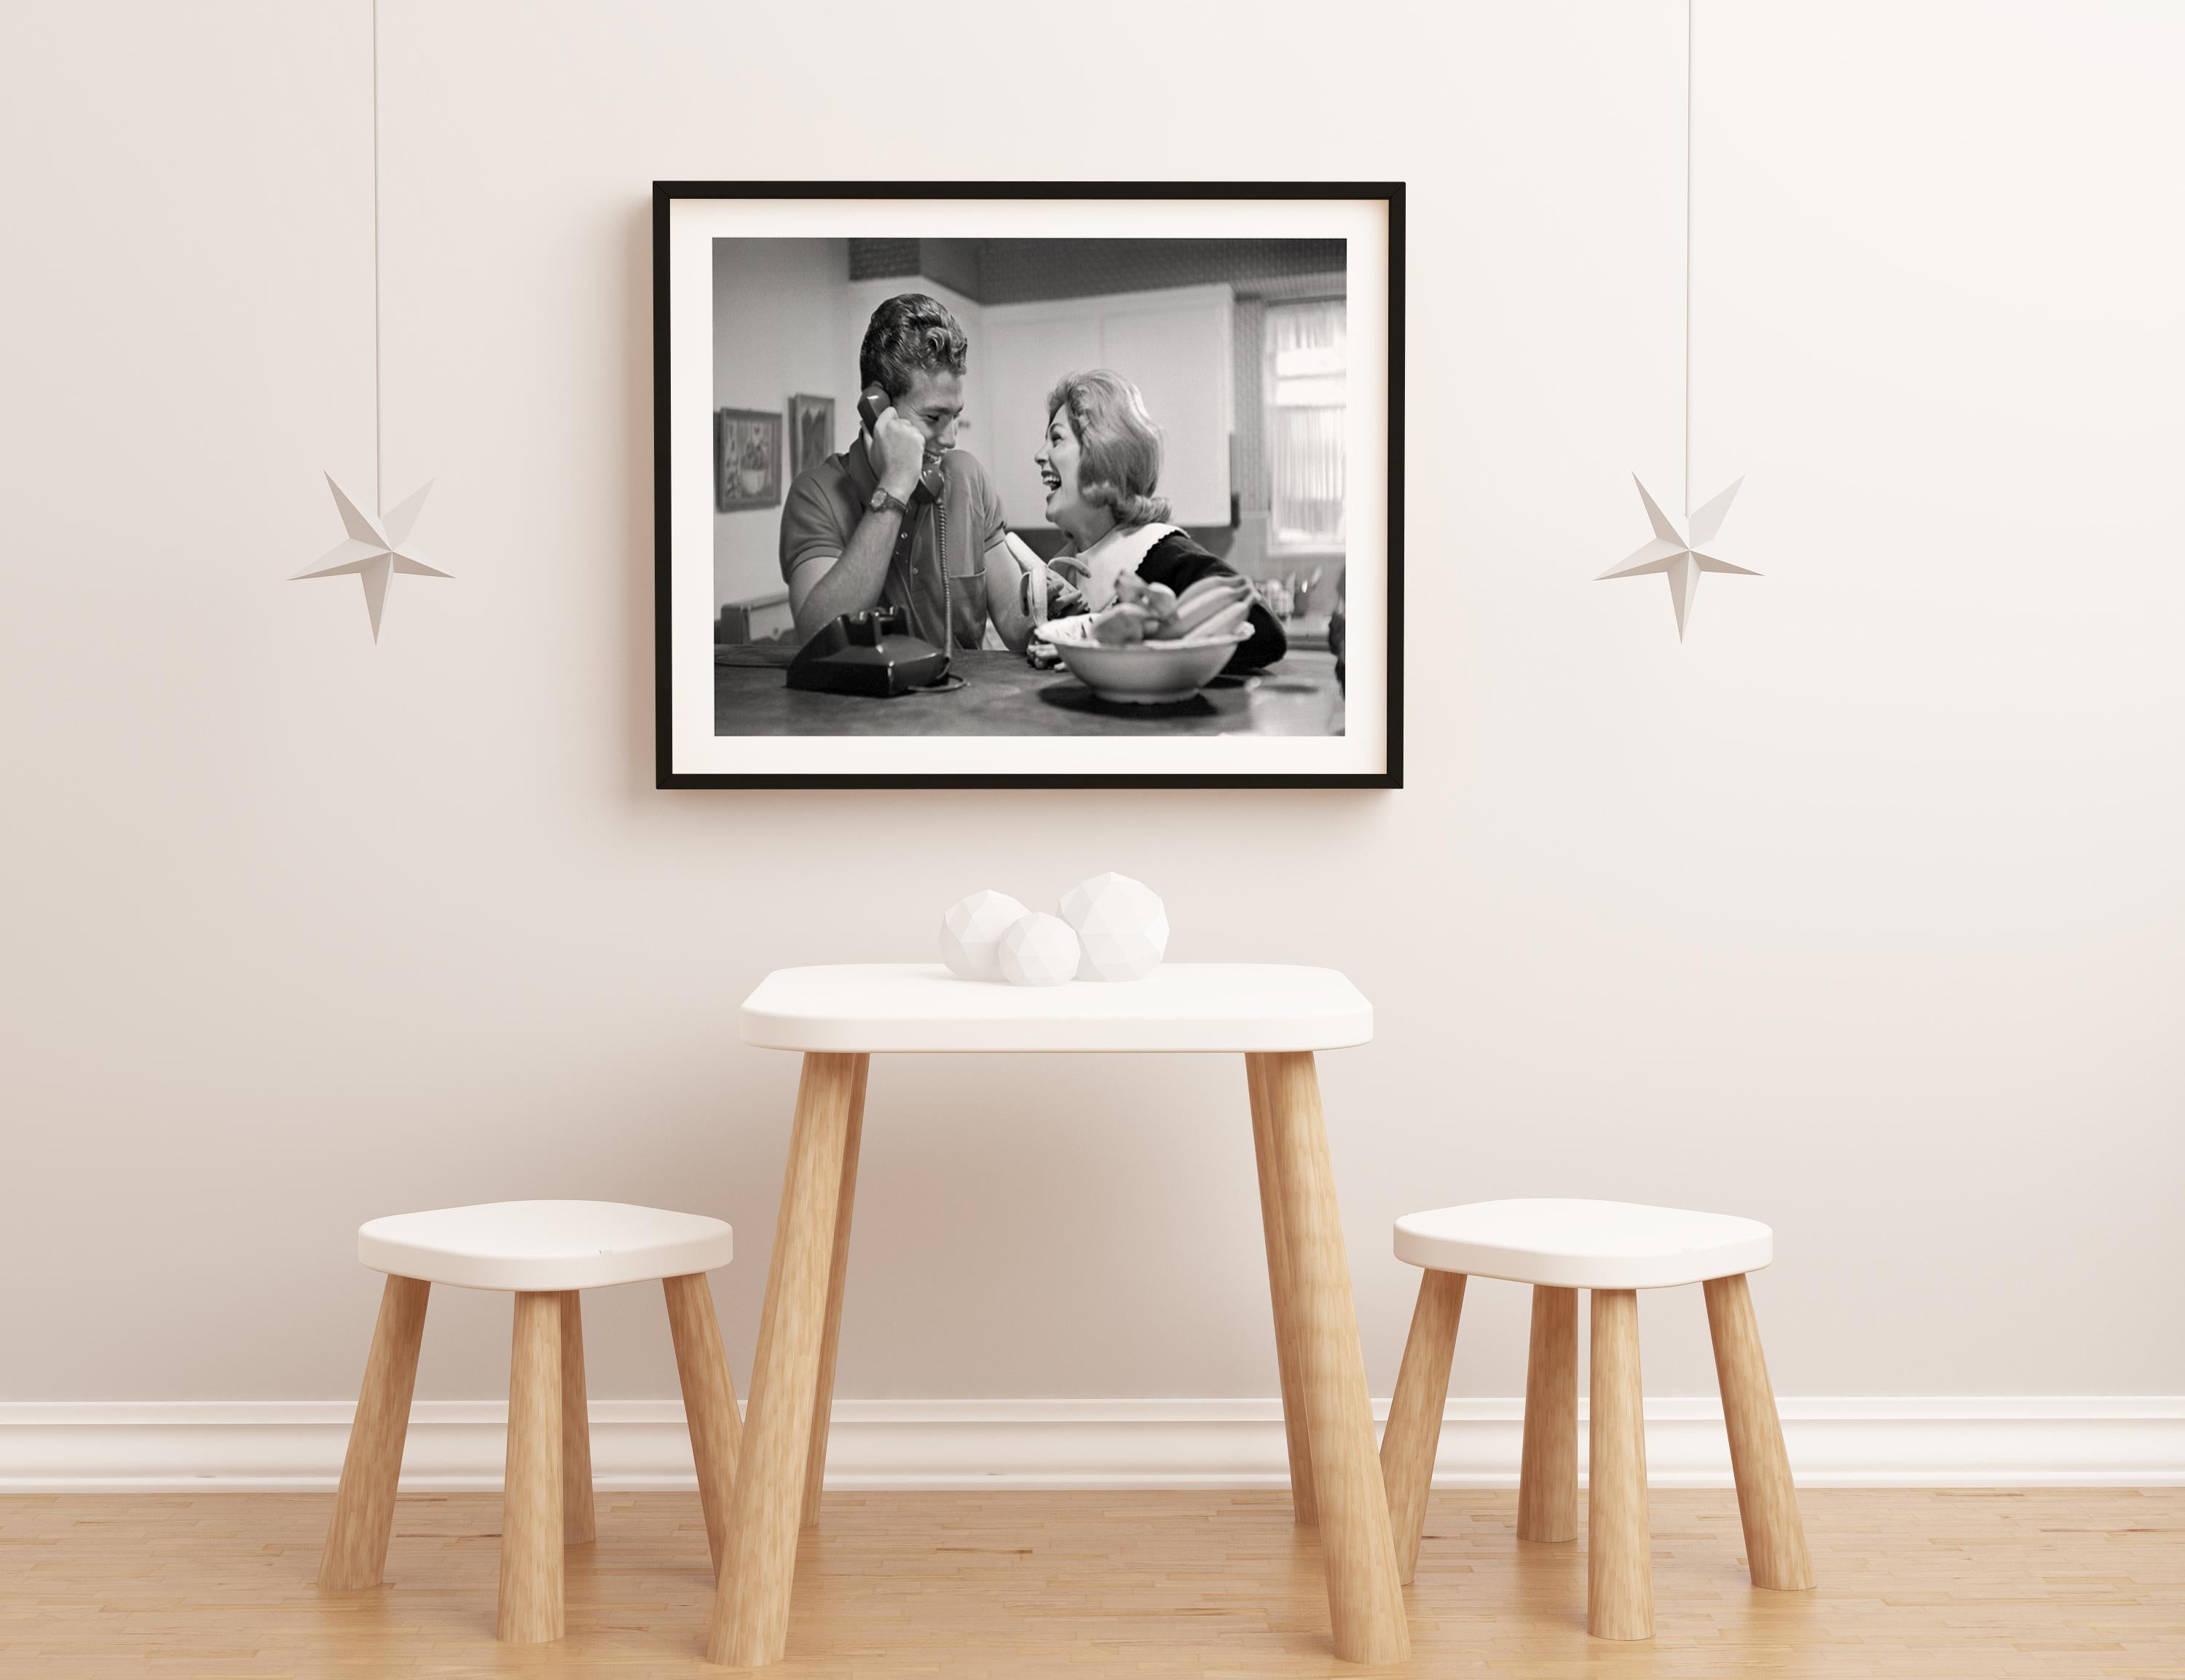 Ryan O'Neal and Joanna Moore Laughing at Home Fine Art Print - Gray Portrait Photograph by Bill Kobrin